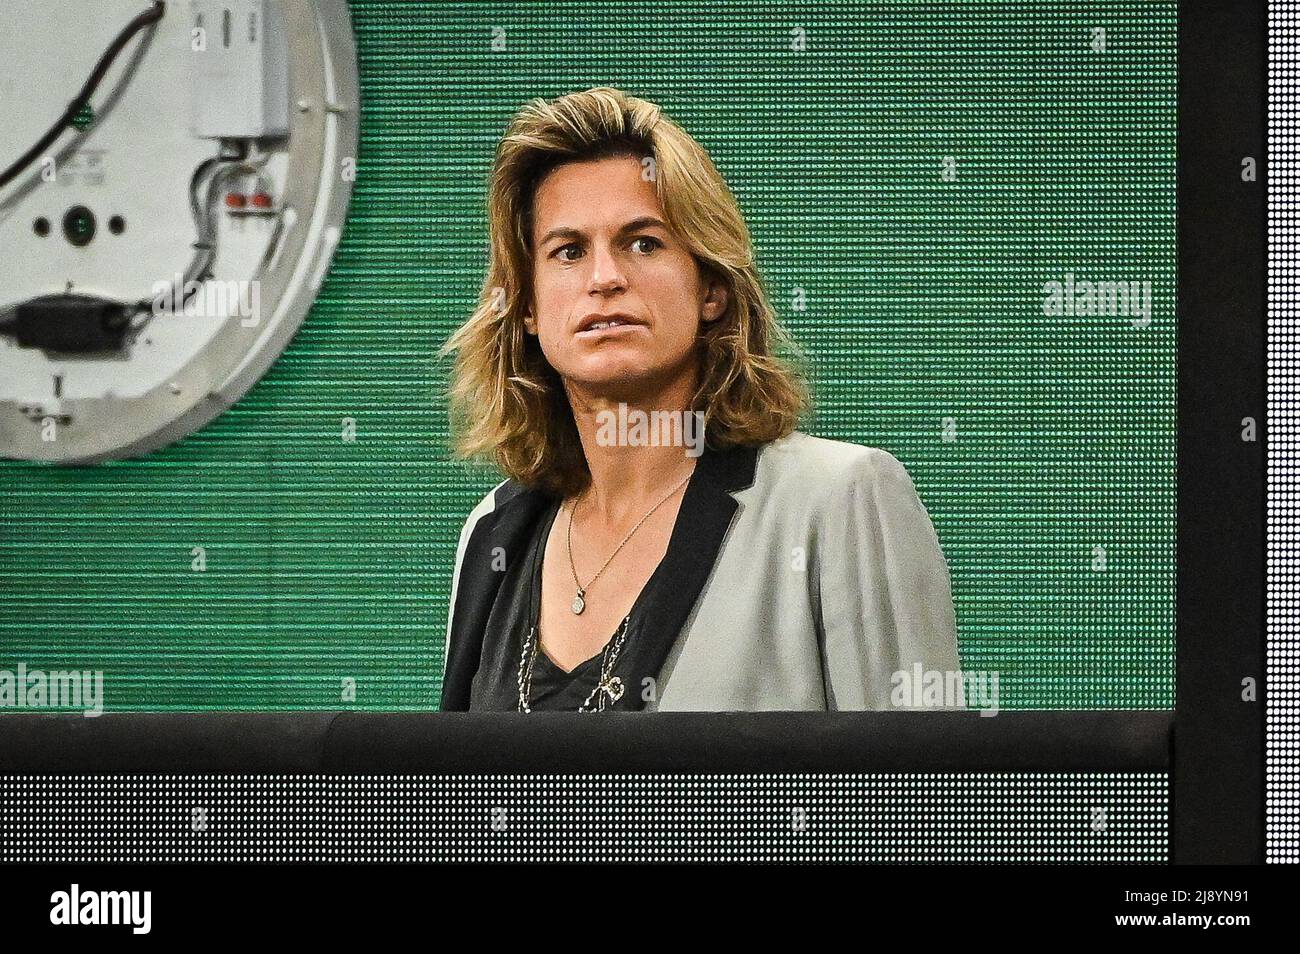 Amelie MAURESMO director of Roland Garros during the Qualifying Day four of Roland-Garros 2022, French Open 2022, Grand Slam tennis tournament on May 19, 2022 at the Roland-Garros stadium in Paris, France -